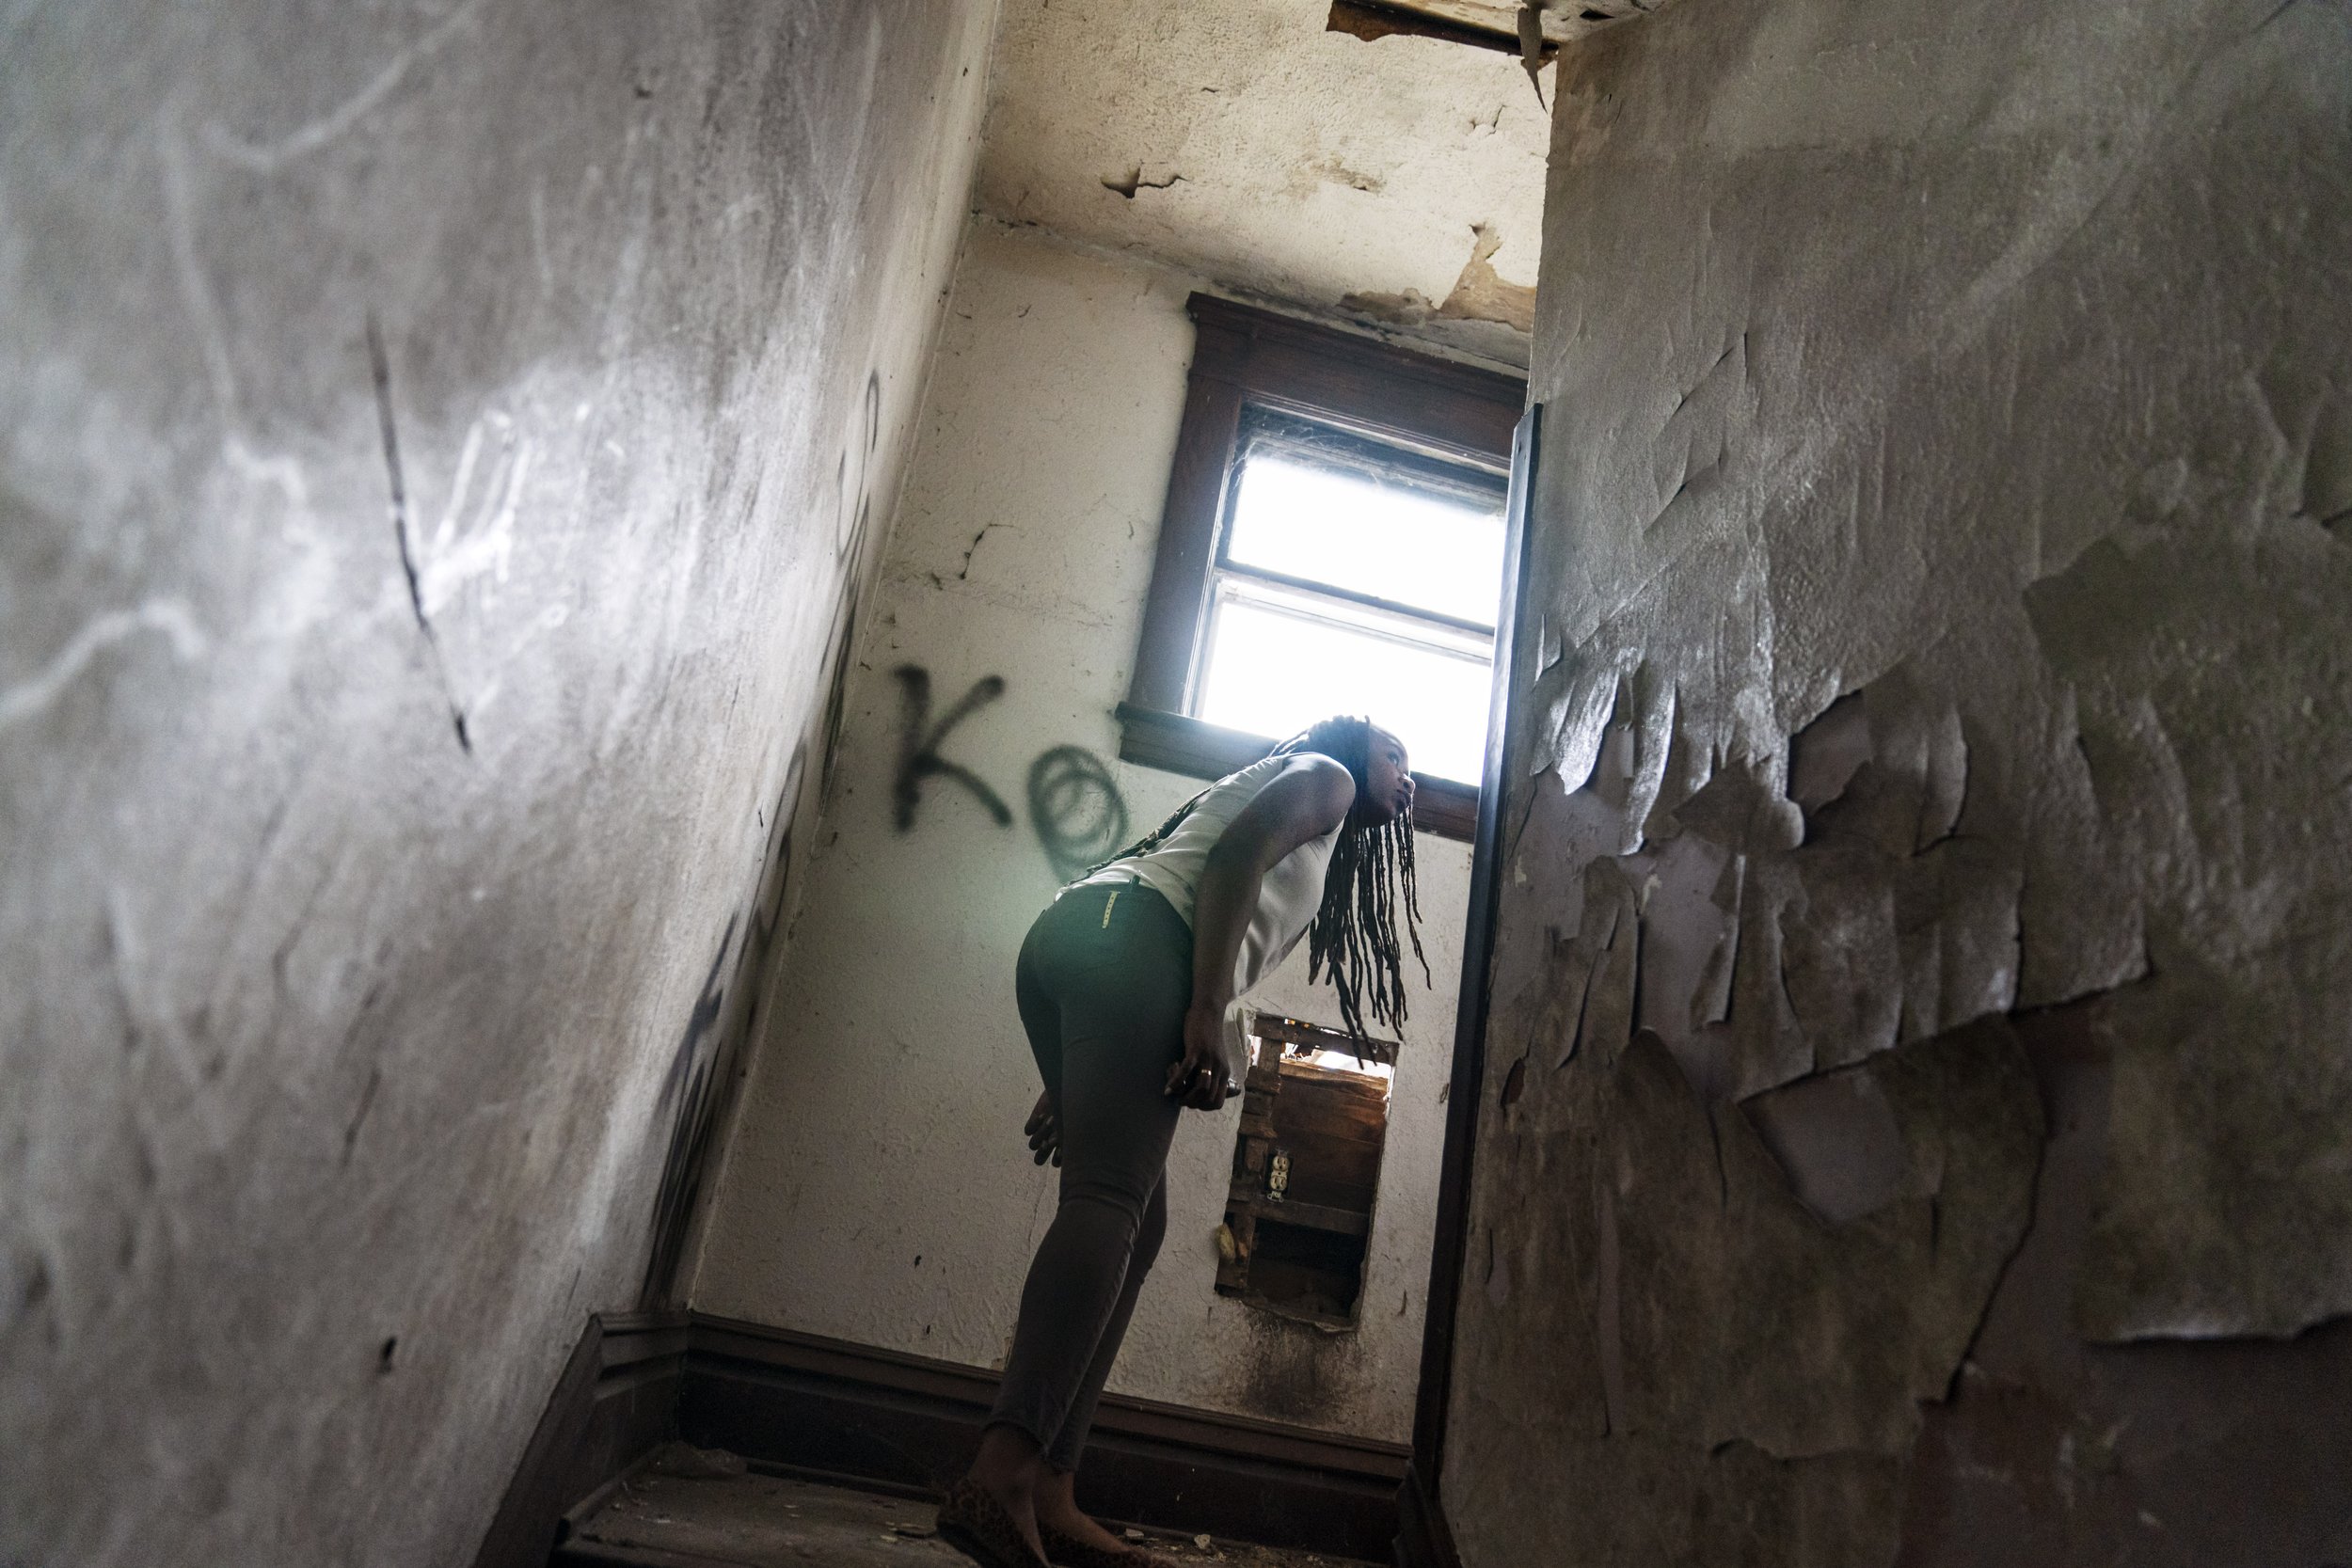  Larrecsa Cox peers around a stairwell while walking through an abandoned home frequented by people struggling with addiction, in Huntington, W.Va., on March 18, 2021. Cox leads the Quick Response Team, whose mission is to save every person who survi